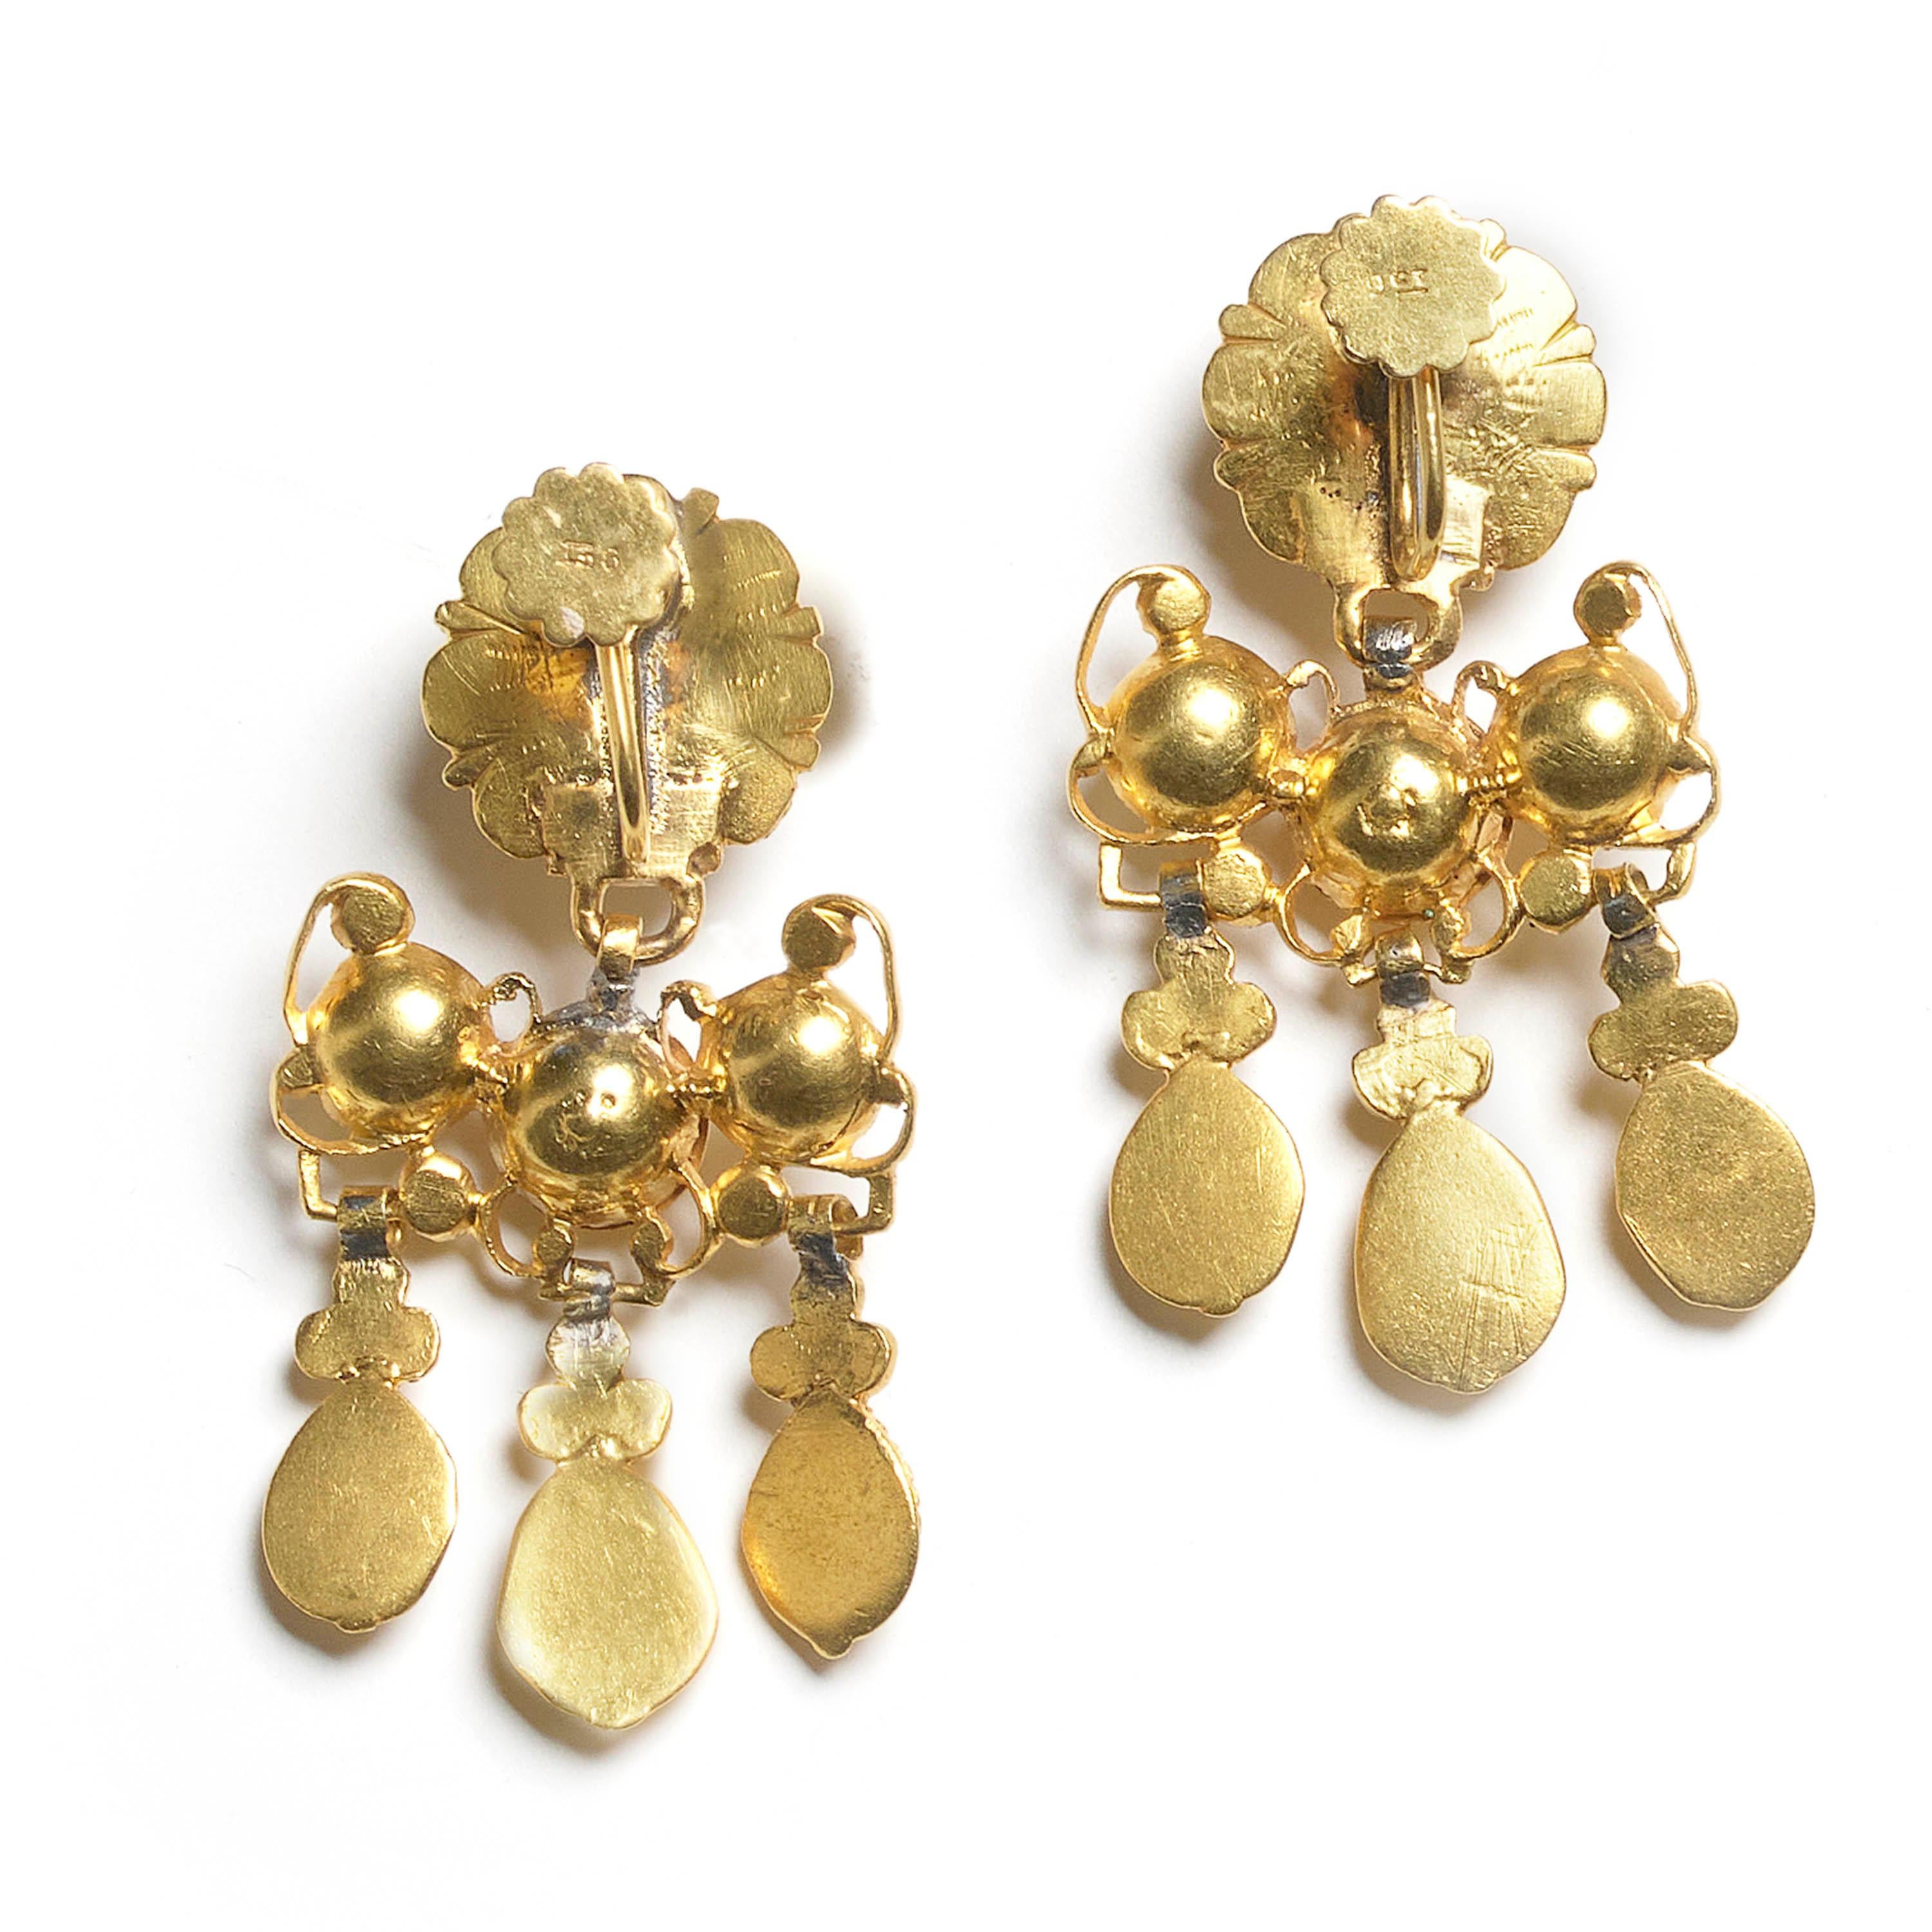 A pair of 18th century Spanish diamond and gold girandole drop earrings, with rosette tops, with domed centres, with engraved edges, set with a rose-cut diamond in the middle, the dome has a surrounding cluster of  rose-cut diamonds, in smaller,